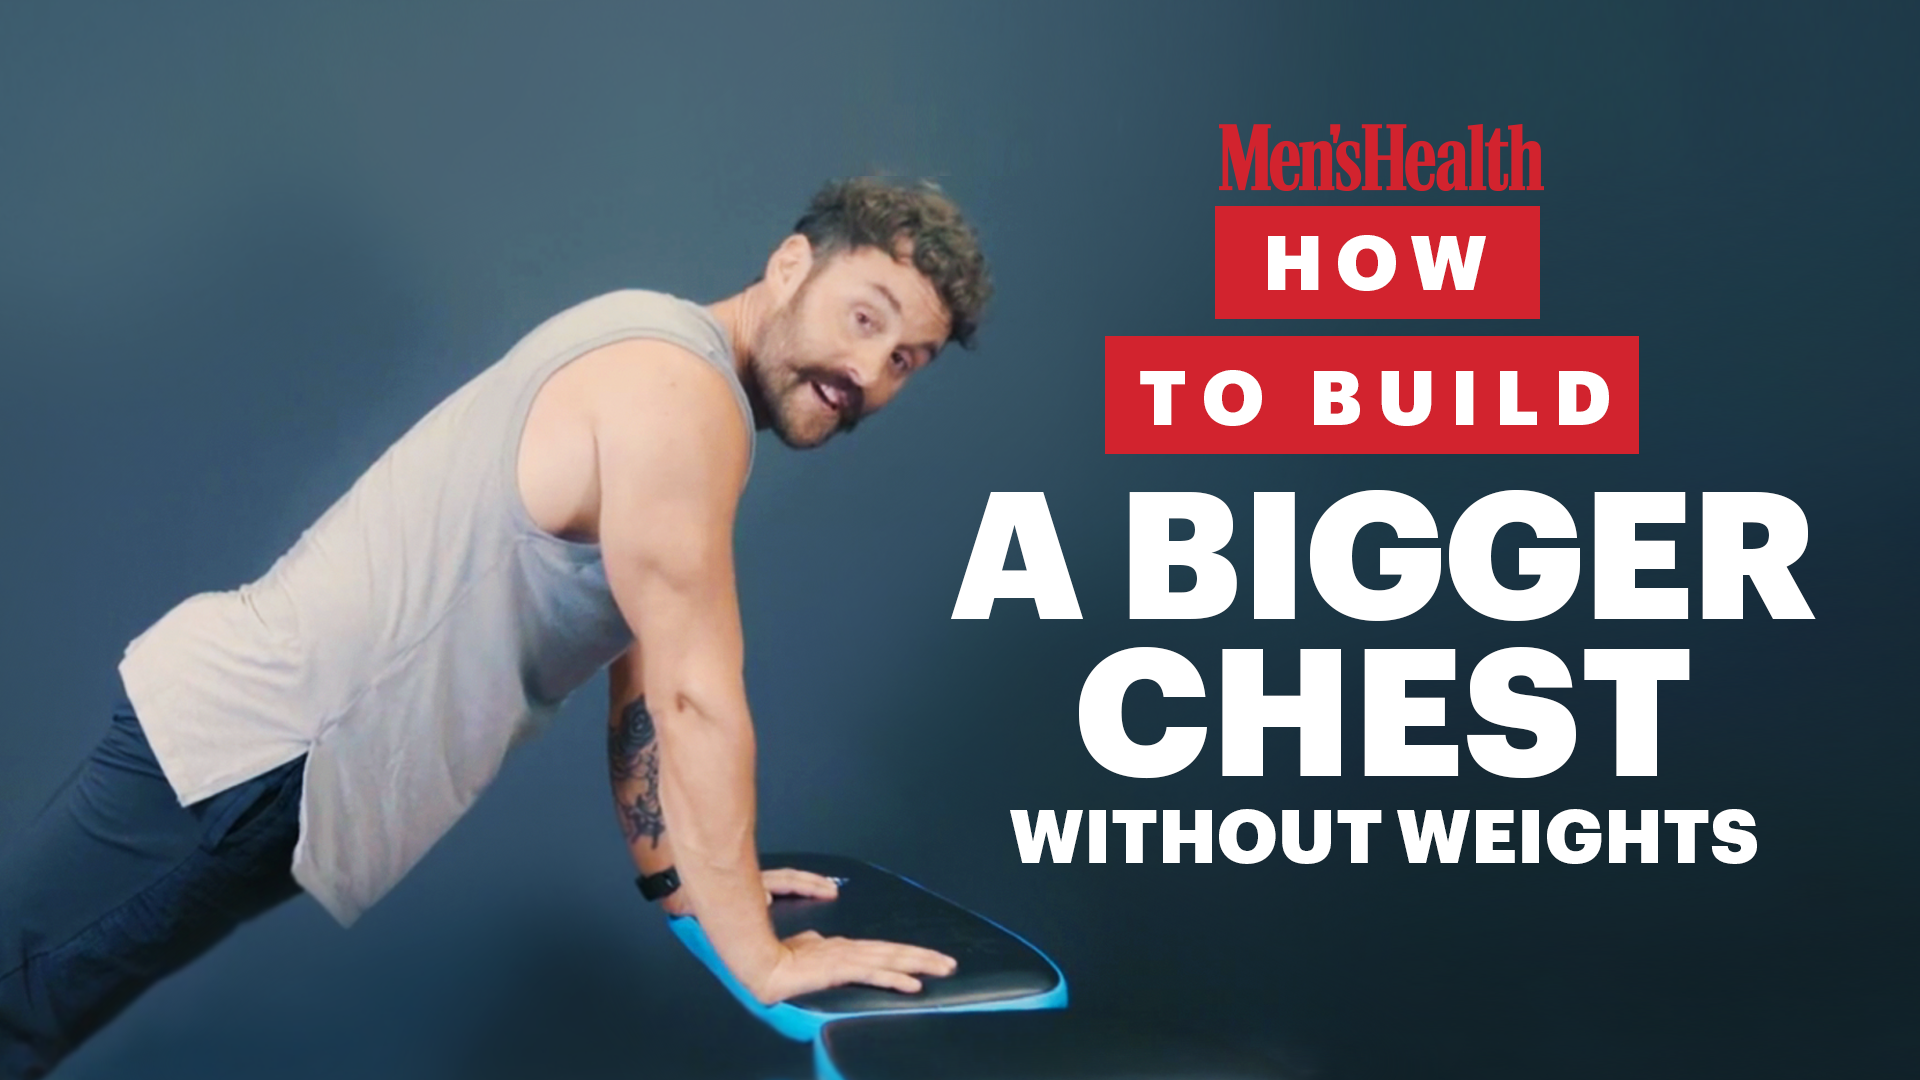 Chest Workout: At Home With and Without Equipment